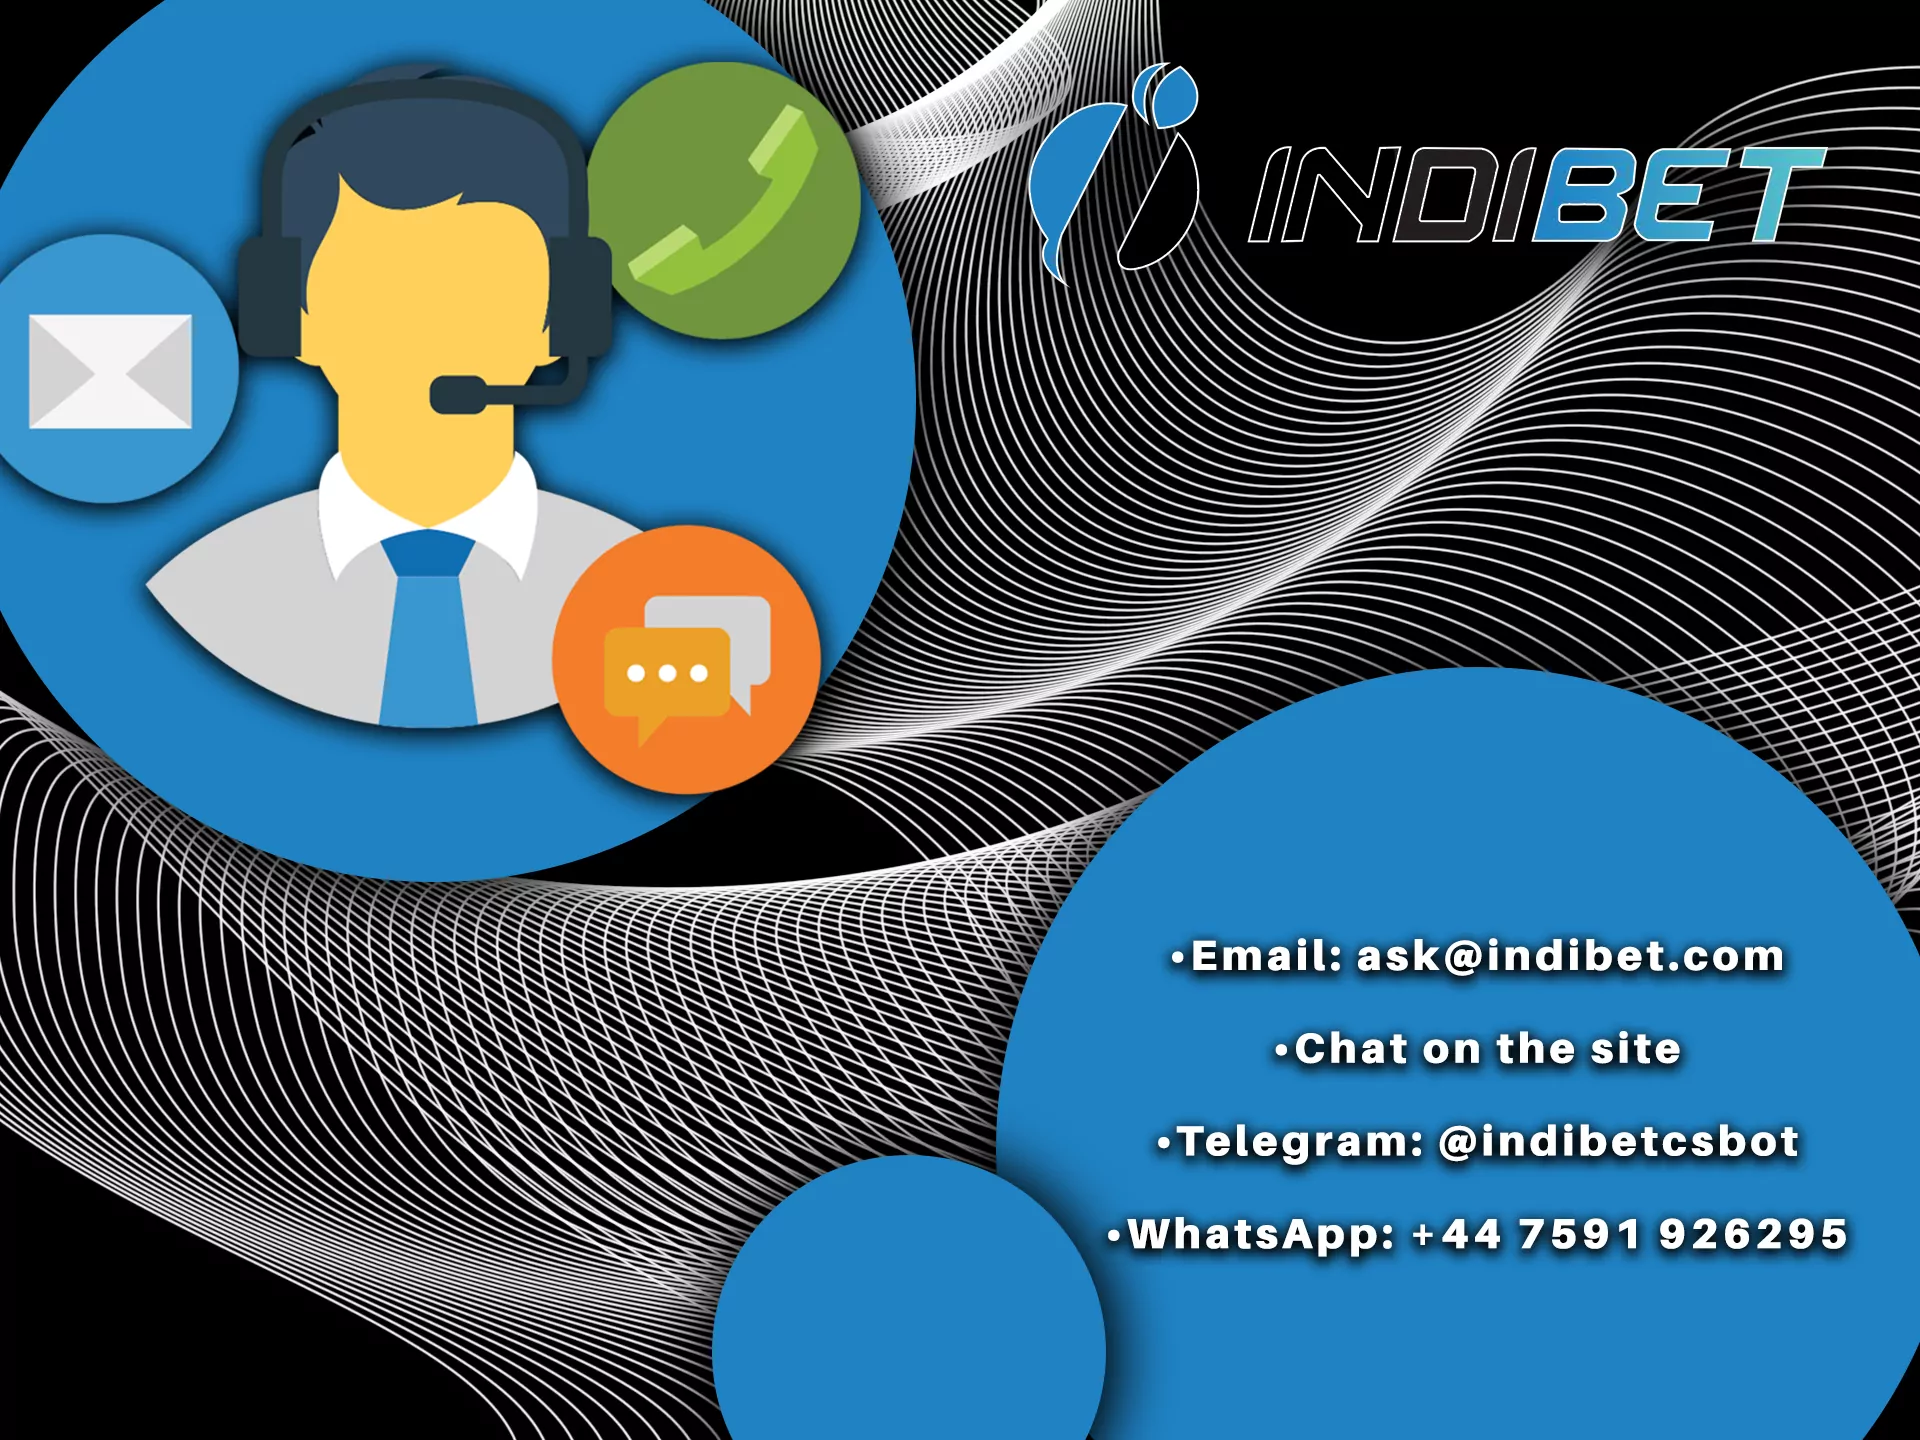 You can always choose email, the chat or a messenger to text the Indibet team.